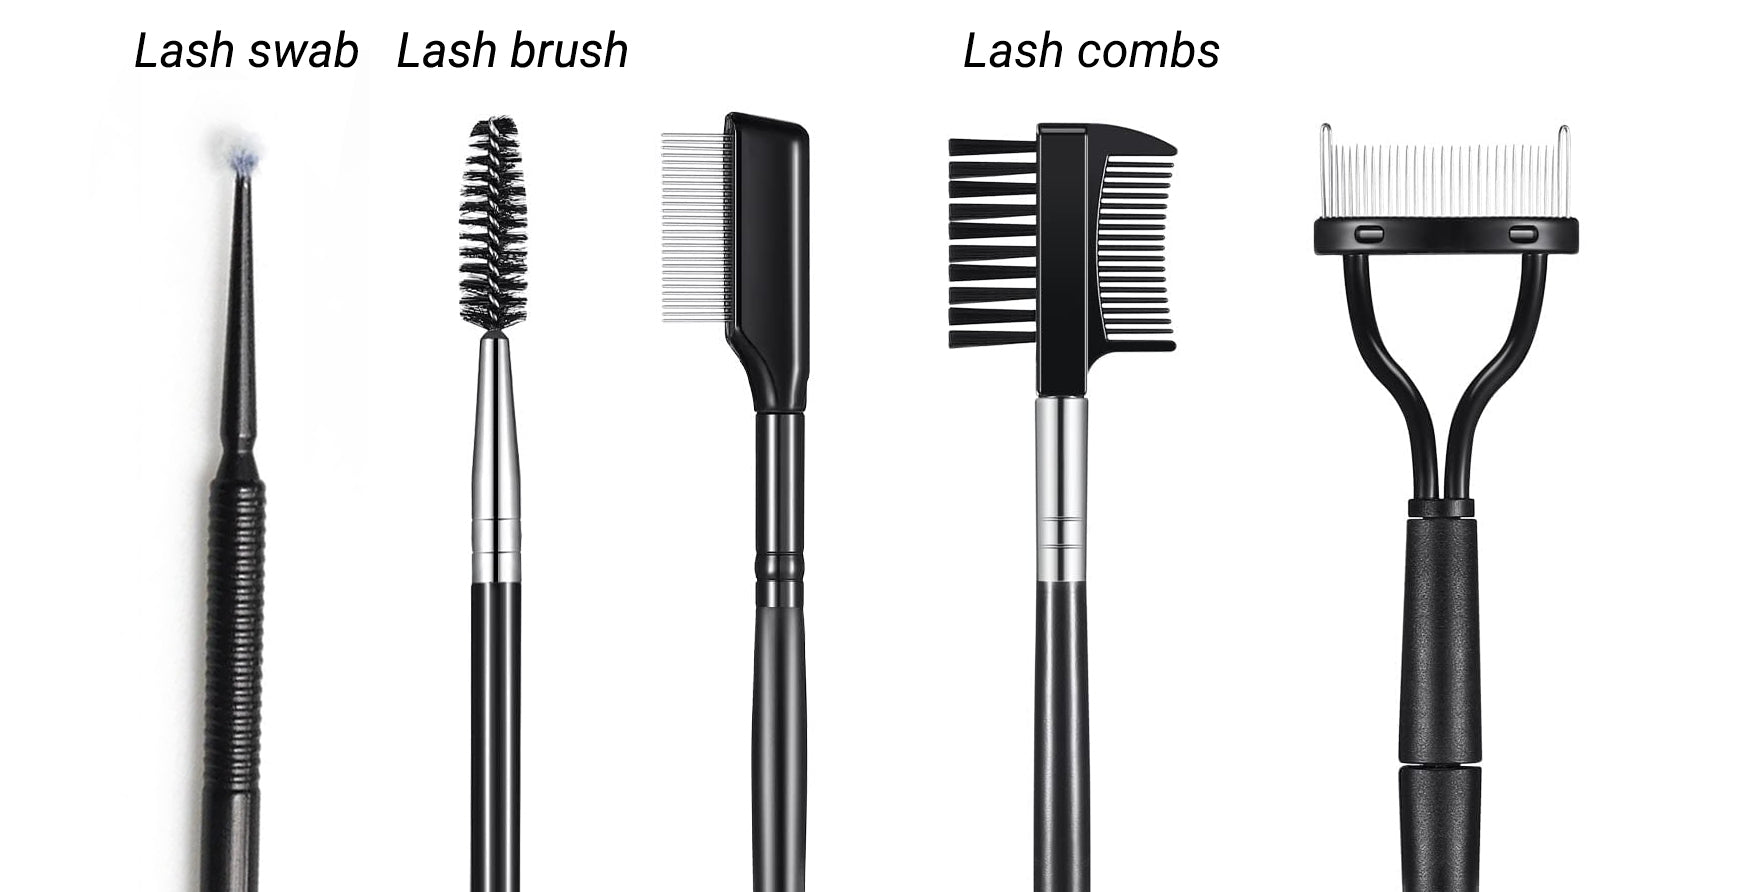 a variety of lash brushes: lash swabs, lash brushes, and lash combs, each designed for specific purposes in the maintenance and grooming of eyelash extensions. The assortment highlights the diverse tools used in achieving precise and well-groomed lash looks